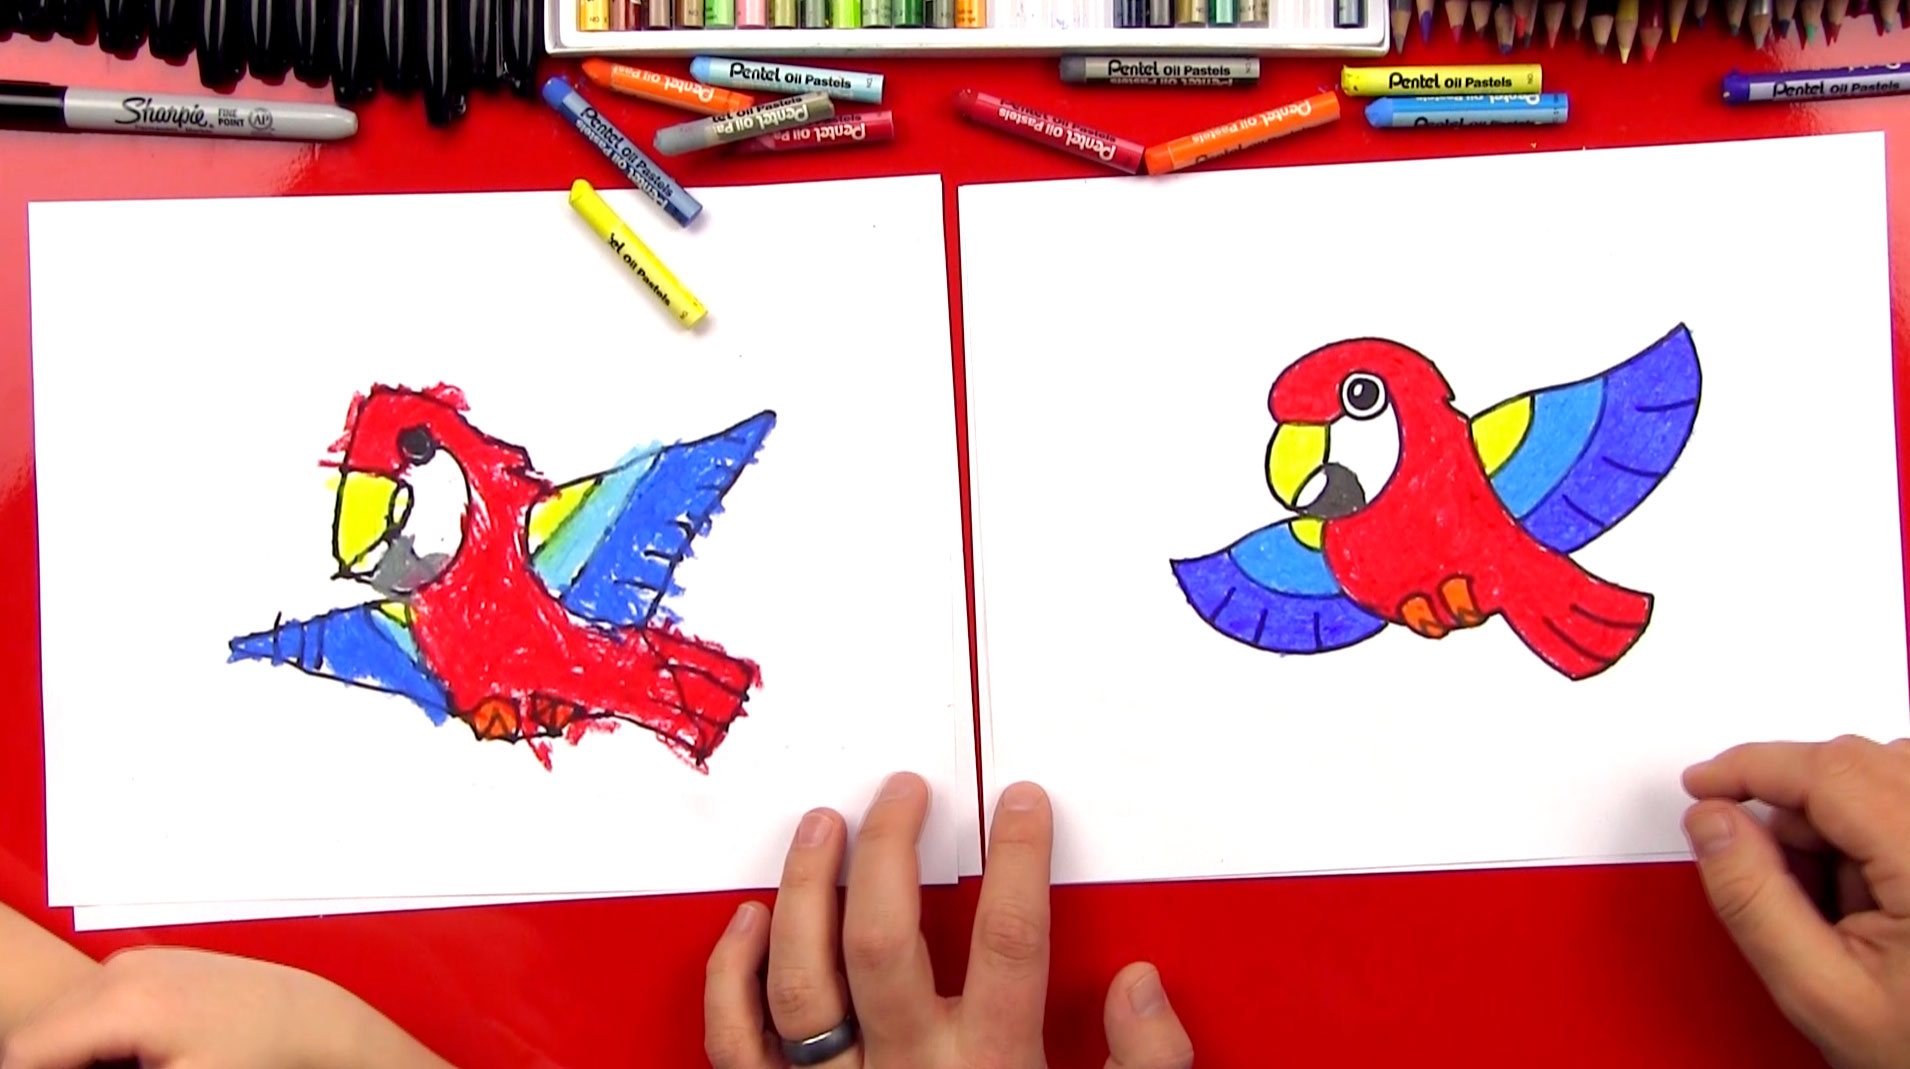 How to draw a parrot easy for kids with number 5 | How to draw a parrot  easy for kids with number 5 | Easy parrot drawing | By Priyanka creative  guruFacebook